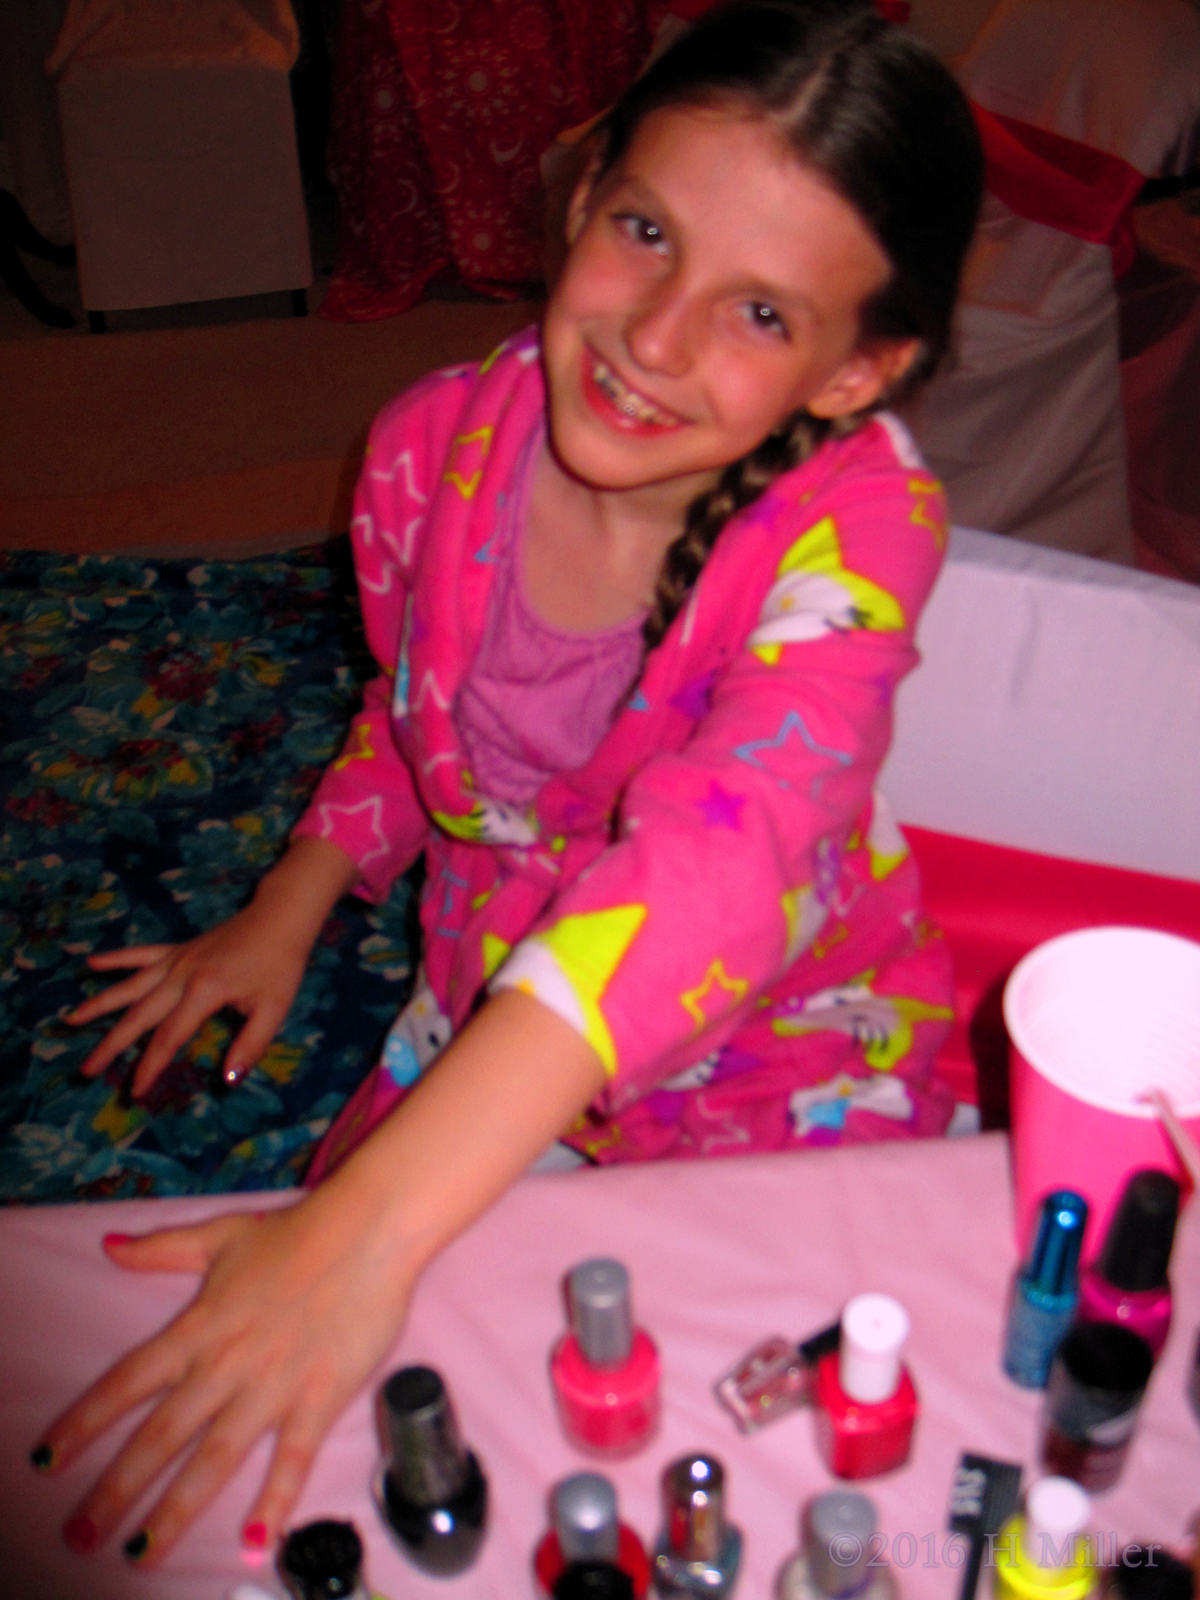 She Is Having Fun At The Kids Party Getting Her Mini Manicure! 